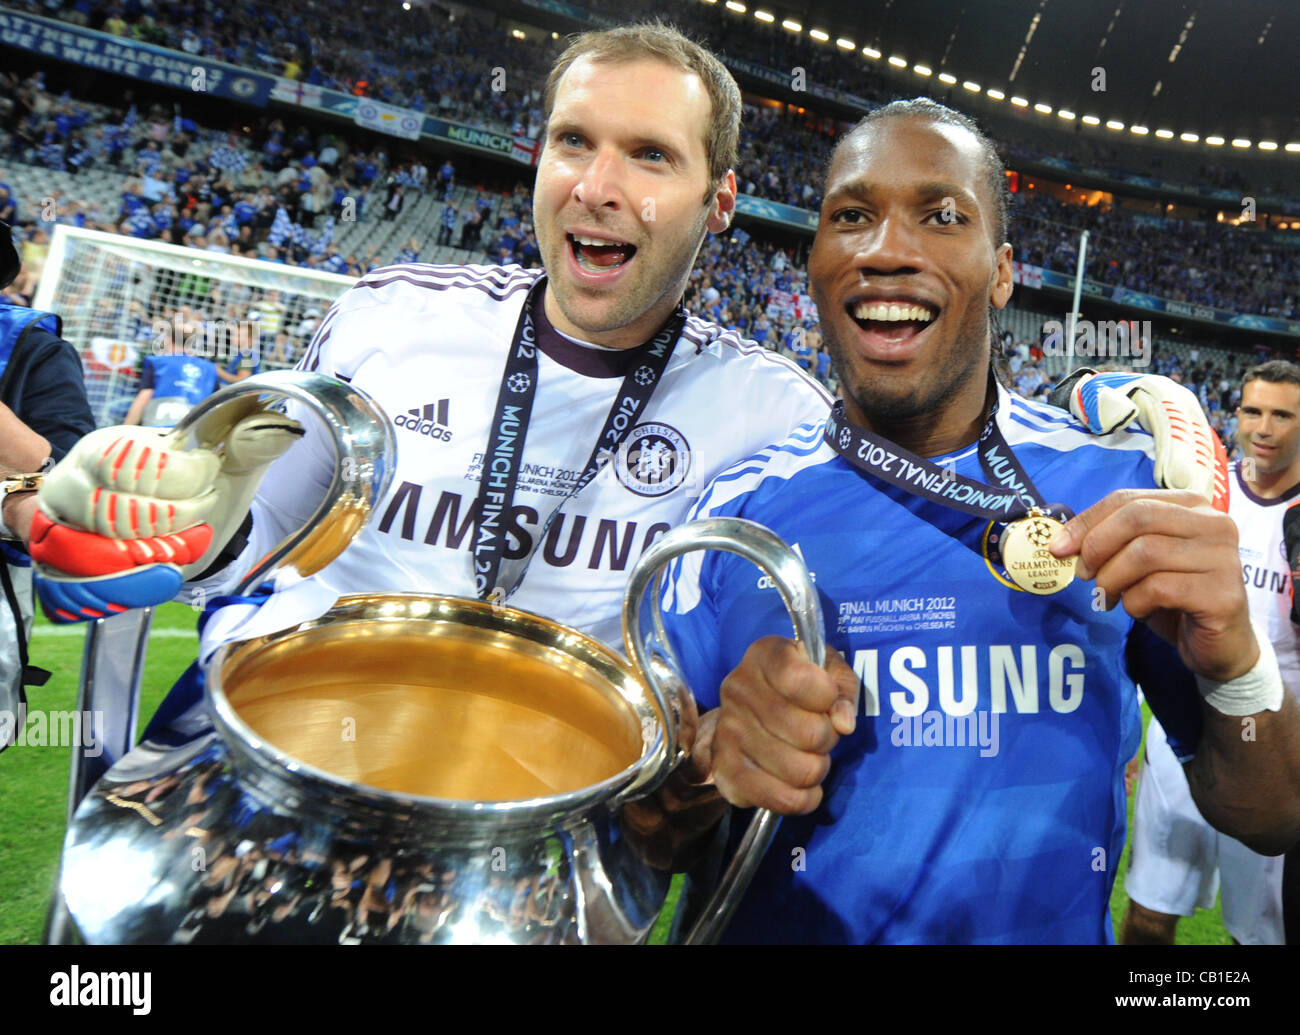 19.05.2012. Munich, Germany. Chelsea's Petr Cech(L) and Didier Drogba celebrate with the trophy after the UEFA Champions League soccer final between FC Bayern Munich and FC Chelsea at Football Arena M in Munich, Germany, 19 May 2012. Stock Photo